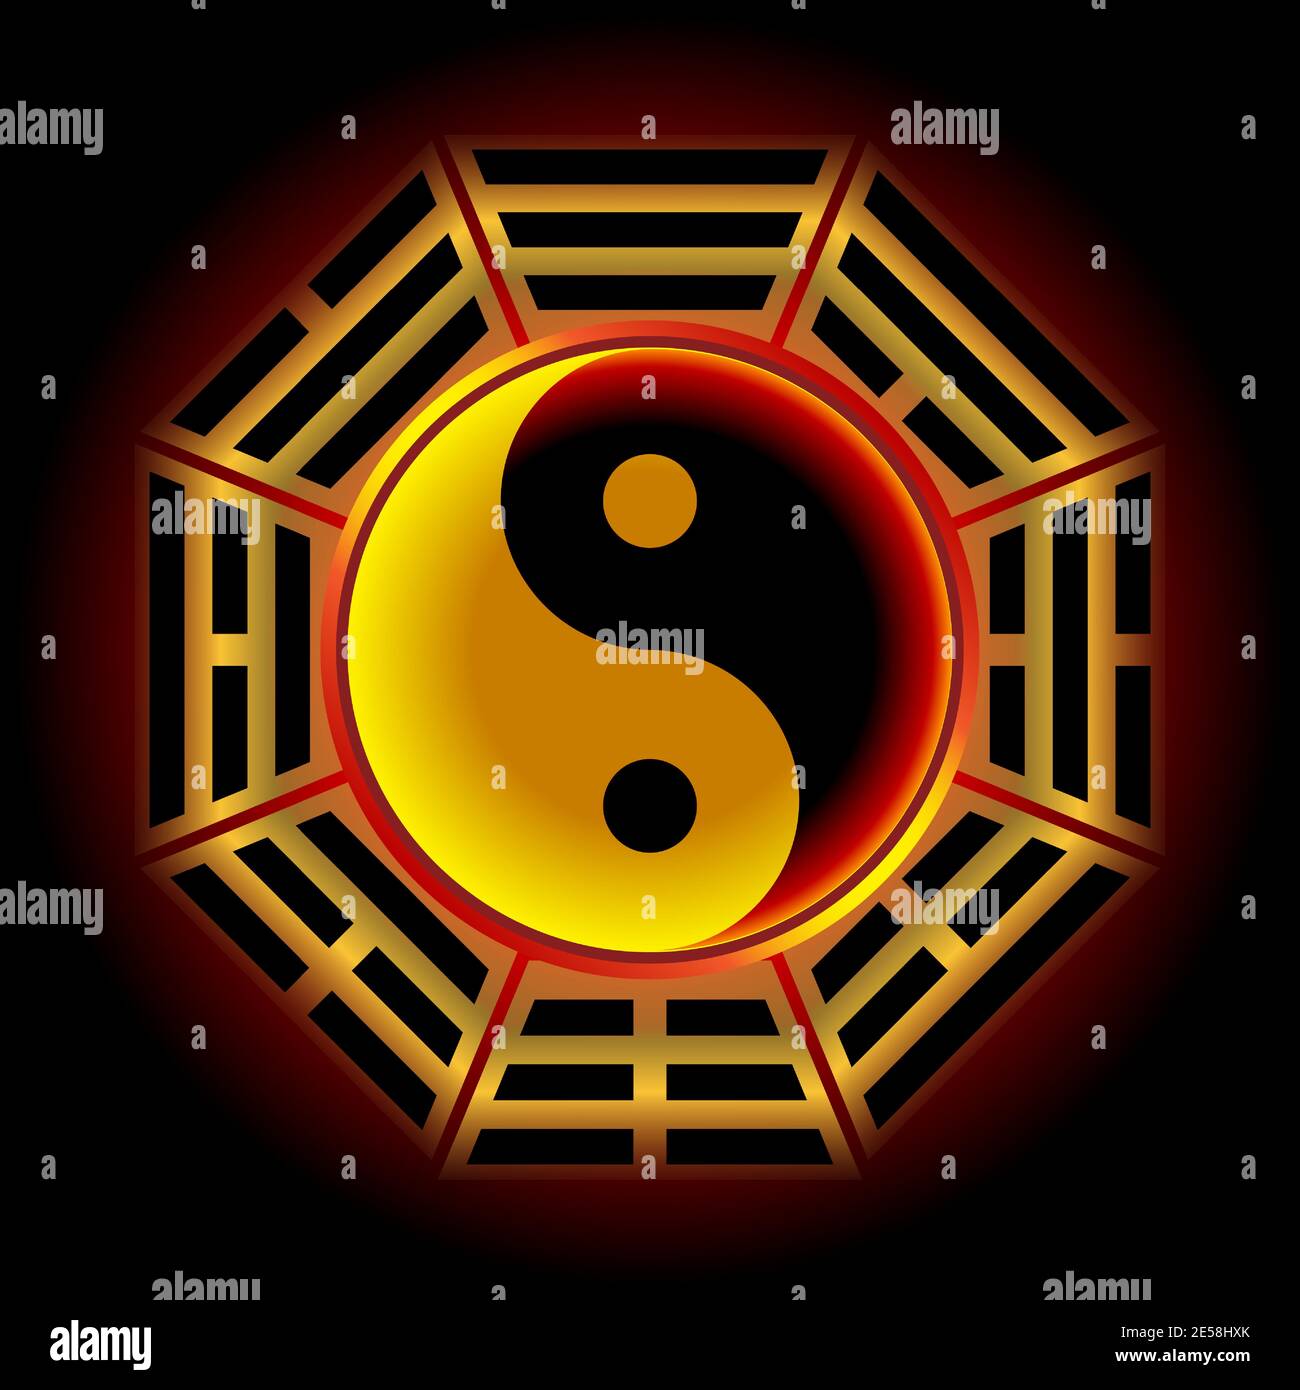 The Yin Yang symbol is surrounded by the I ching (book of changes) symbol. By making it out to have a reddish-black tone Stock Vector